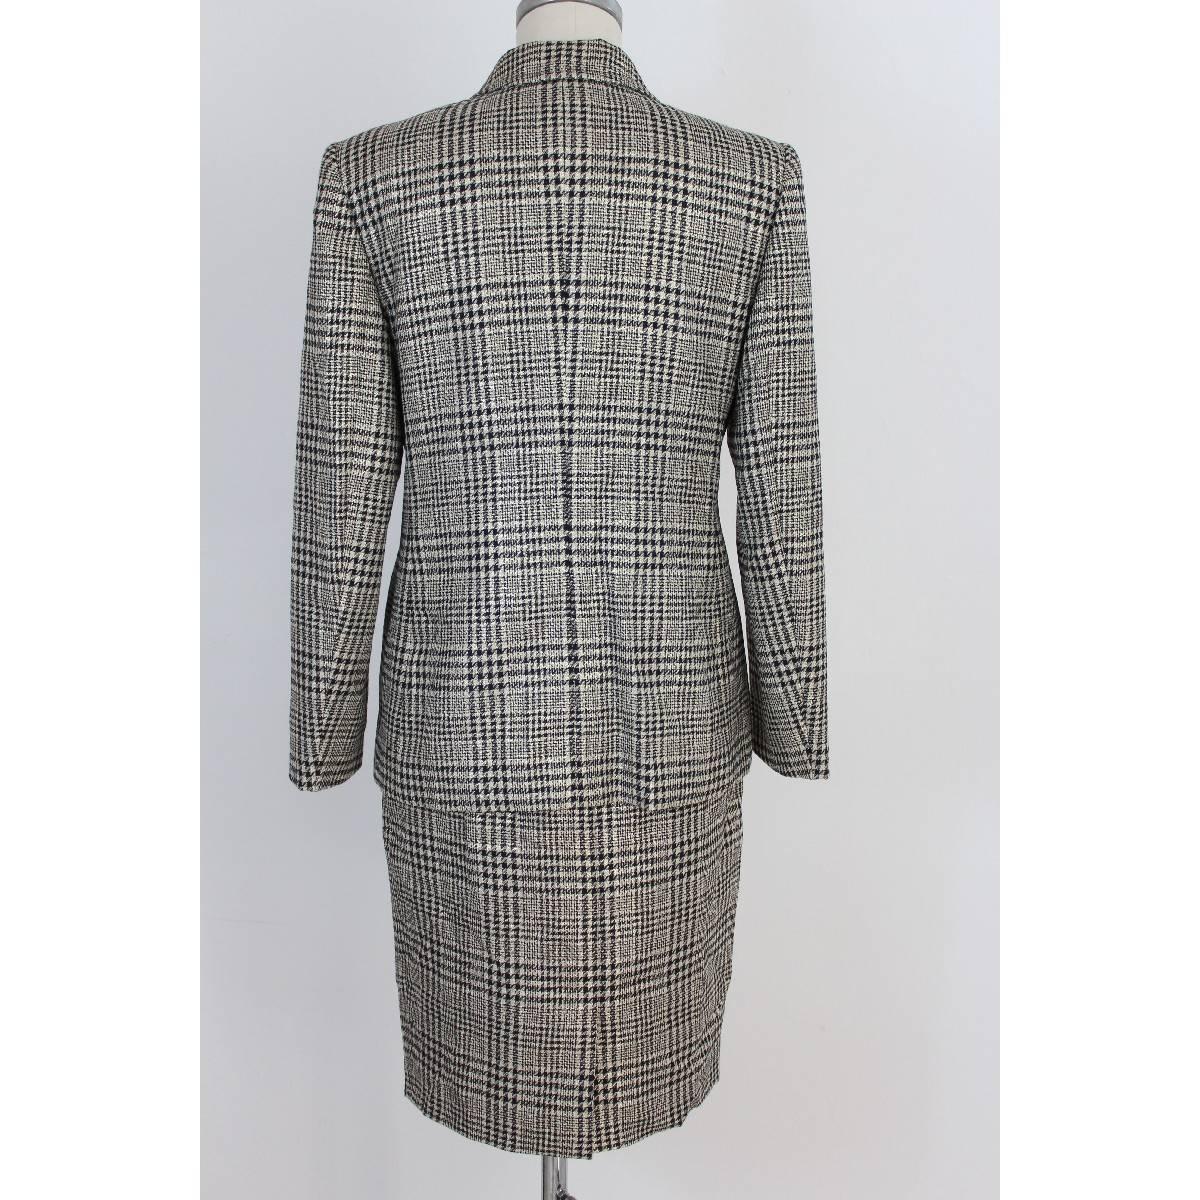 Valentino Pied De Poule Gray Wool Italian Skirt Suit, 1990s size 10 In New Condition For Sale In Brindisi, IT